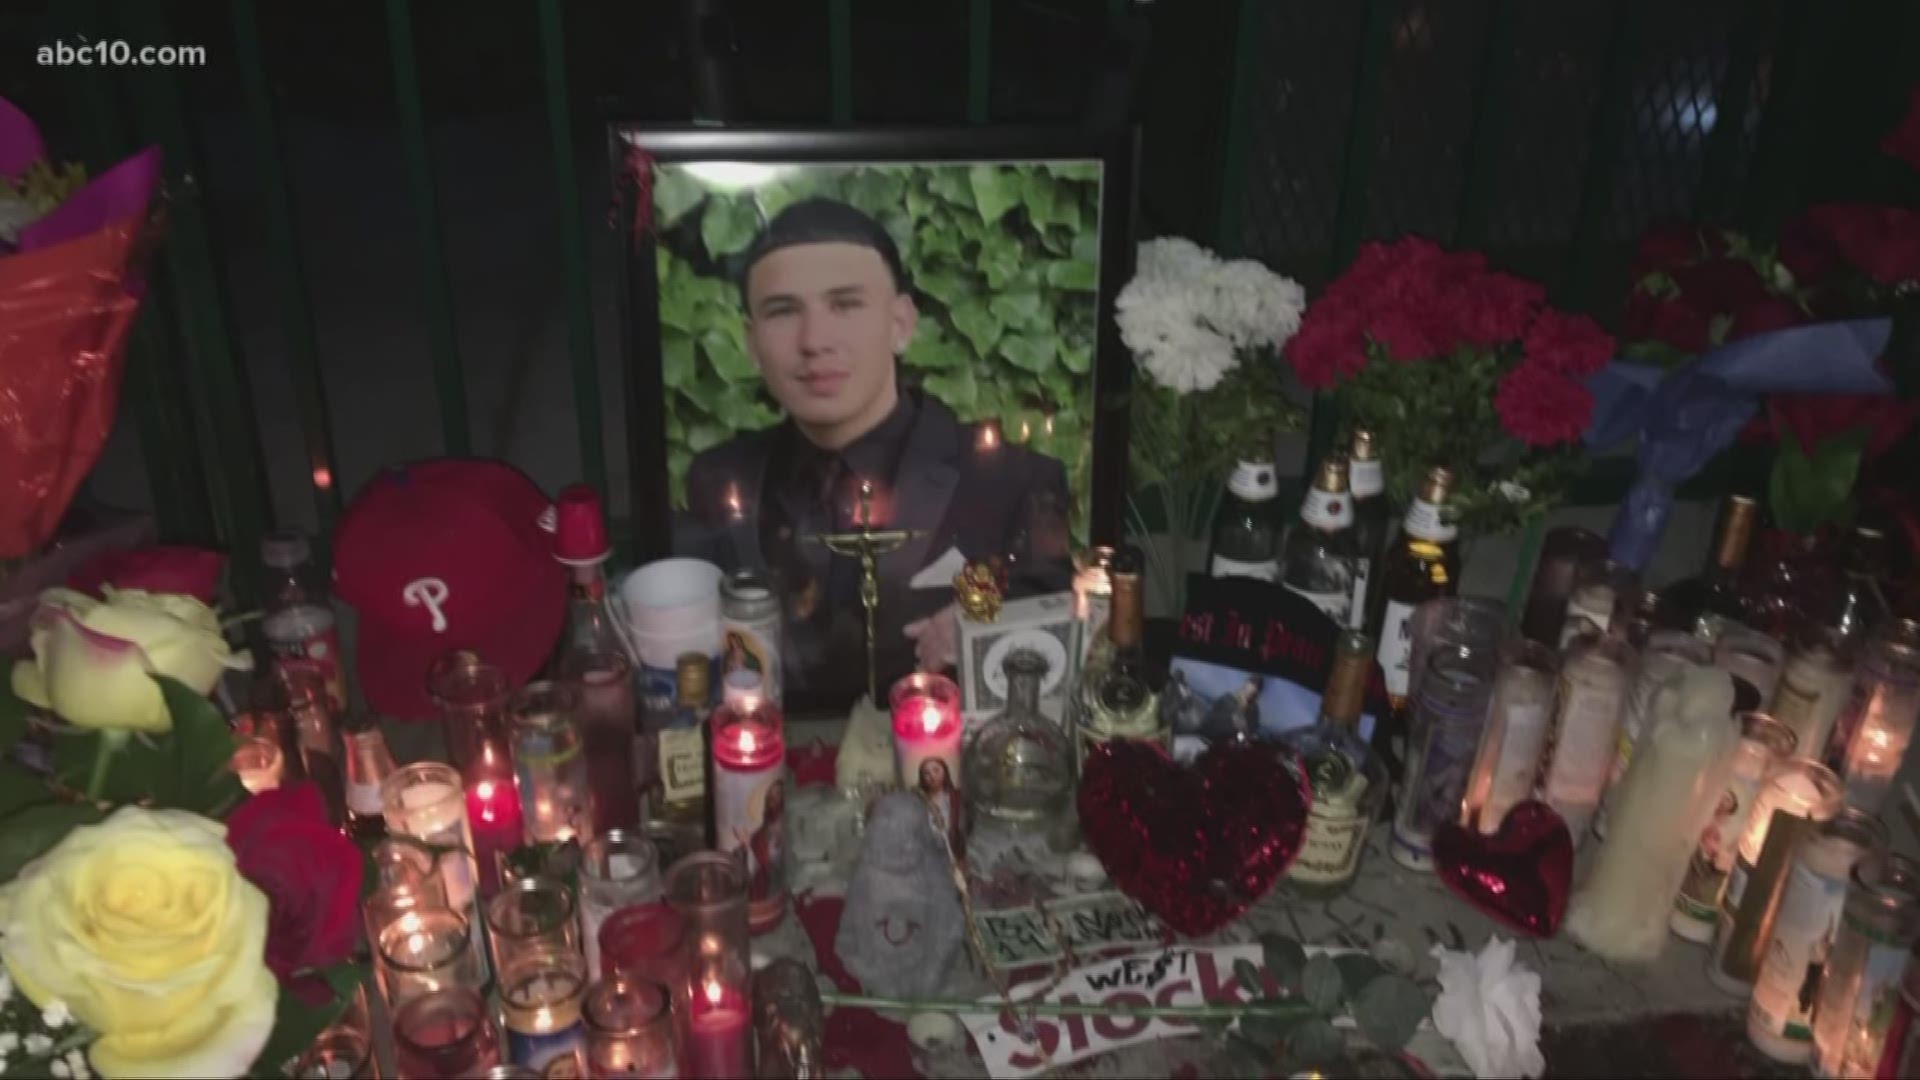 Rafael Chavez was shot and killed over the weekend in Stockton, according to Stockton police.